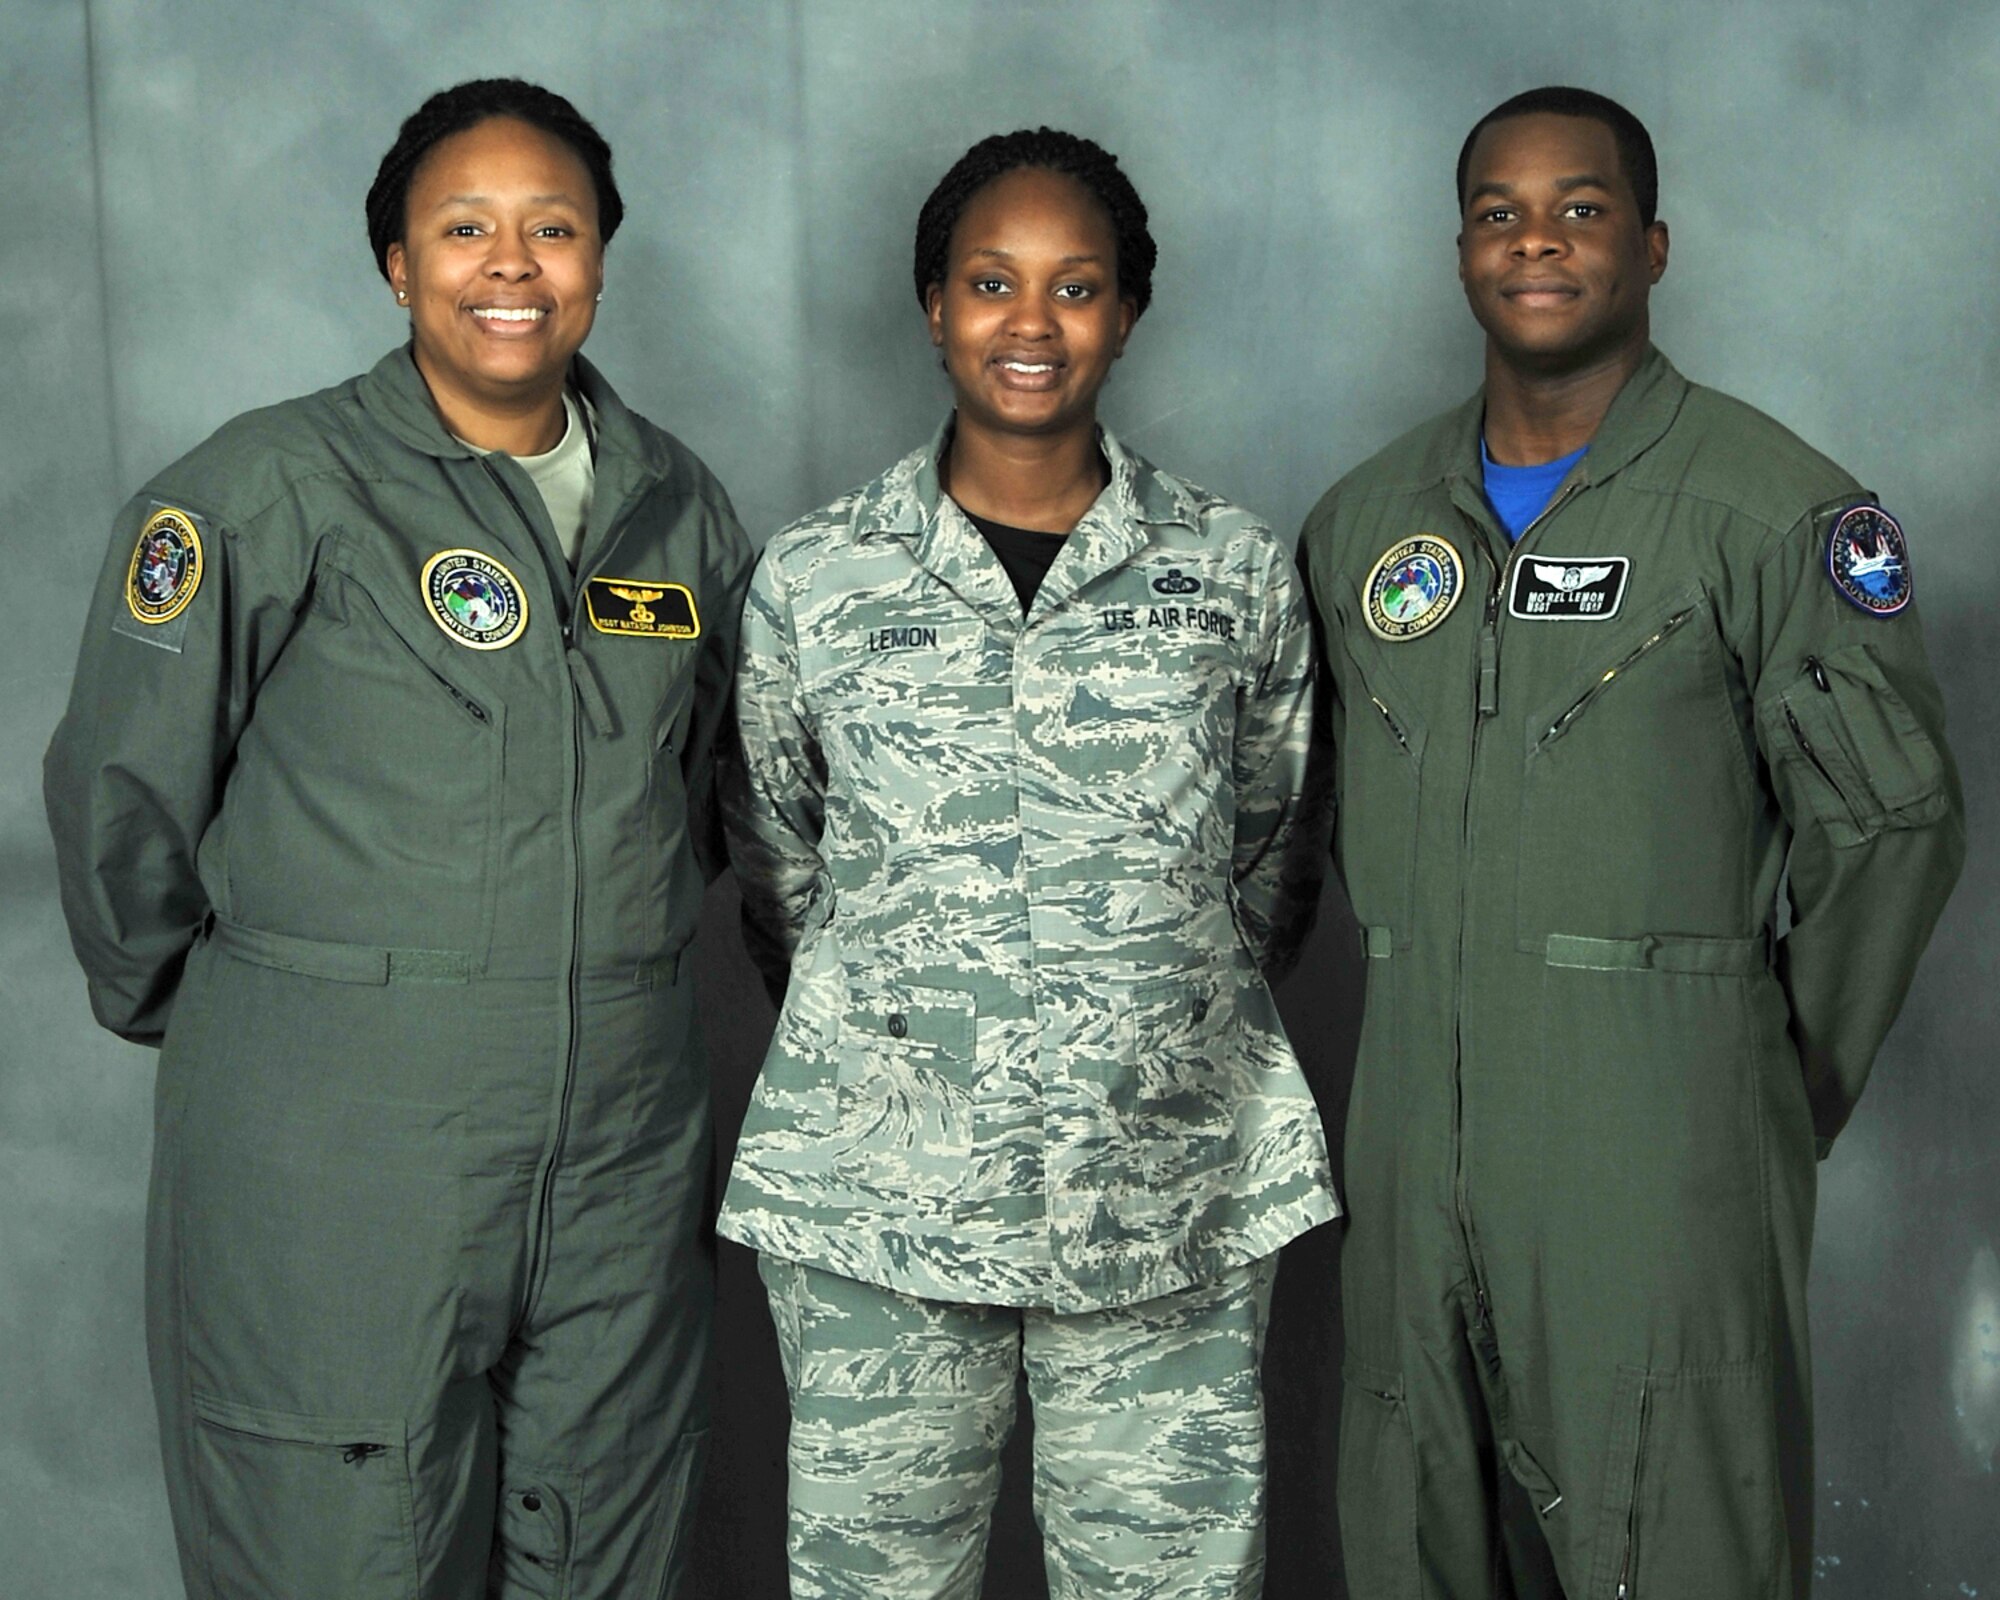 (L to R) Pictured are siblings Master Sgt. Natasha Johnson and Master Sgt. Terri Lemon and Terri’s husband Master Sgt. Mo’rel Lemon. They are all stationed at Offutt Air Force Base, Nebraska, and their family is tied together in many unique ways including rank and career field. (U.S. Air Force photo by Charles Haymond)